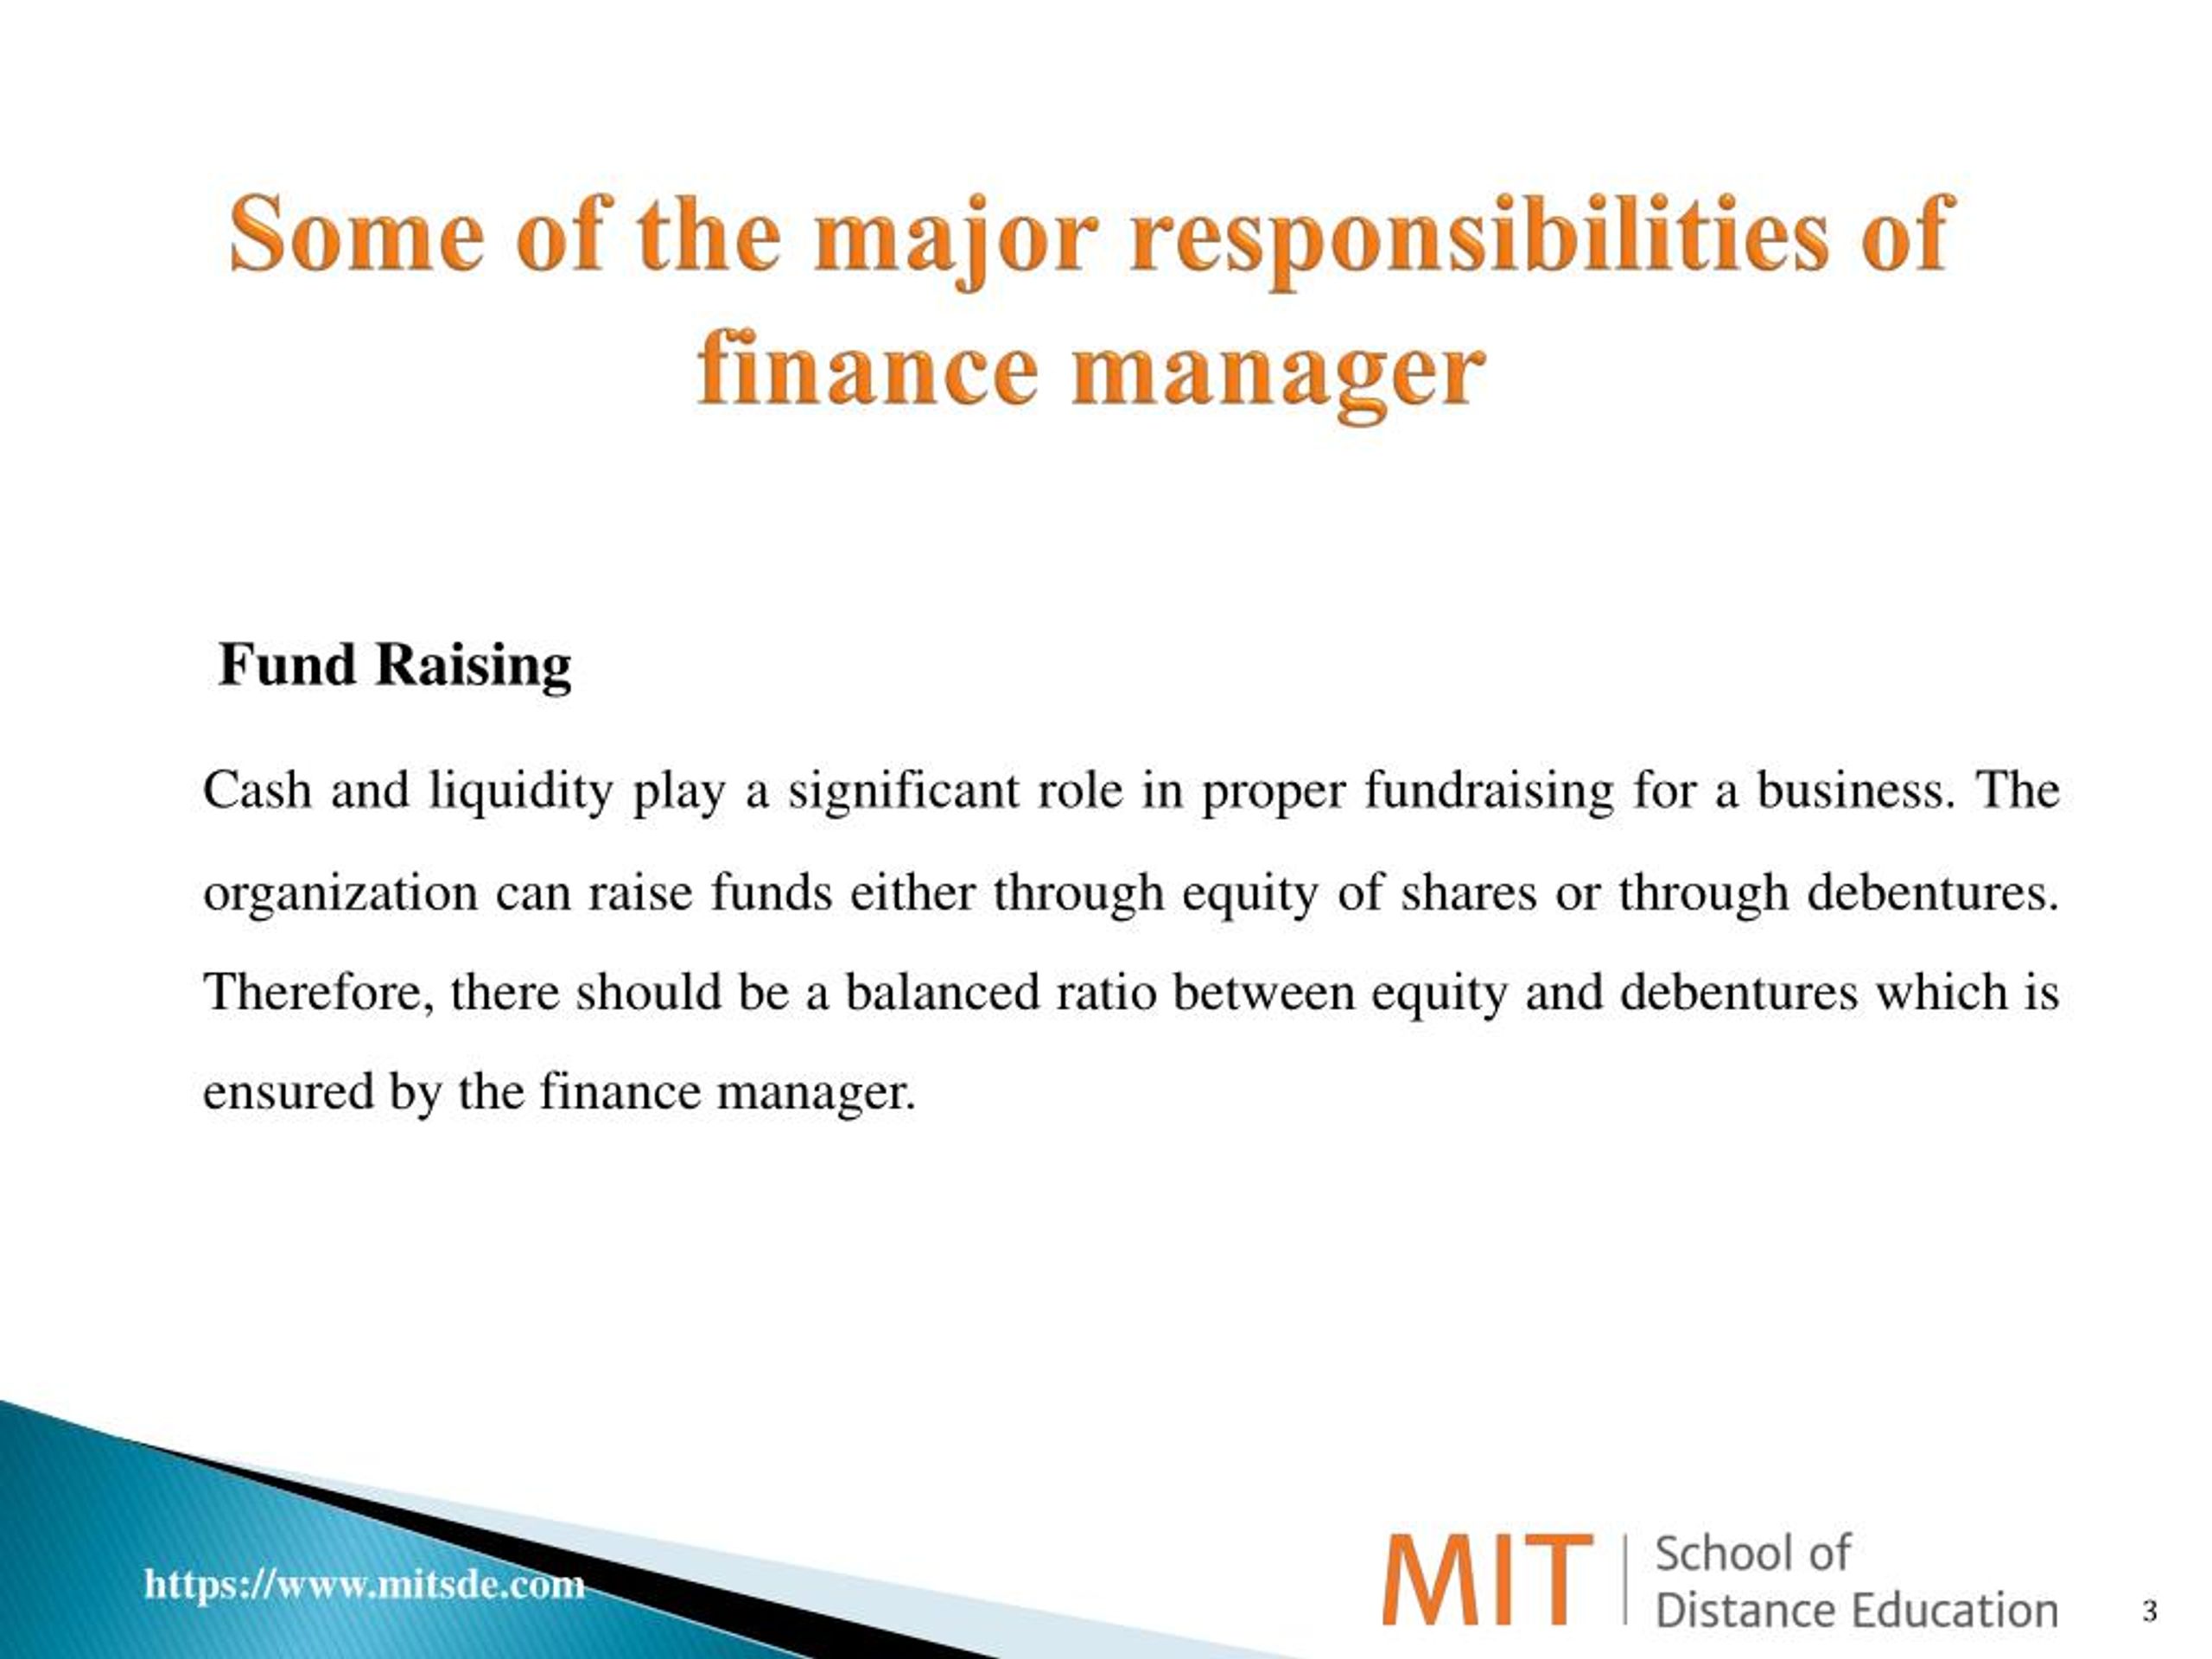 Ppt - Four Important Roles Of Finance Manager | Mitsde Powerpoint  Presentation - Id:8035707